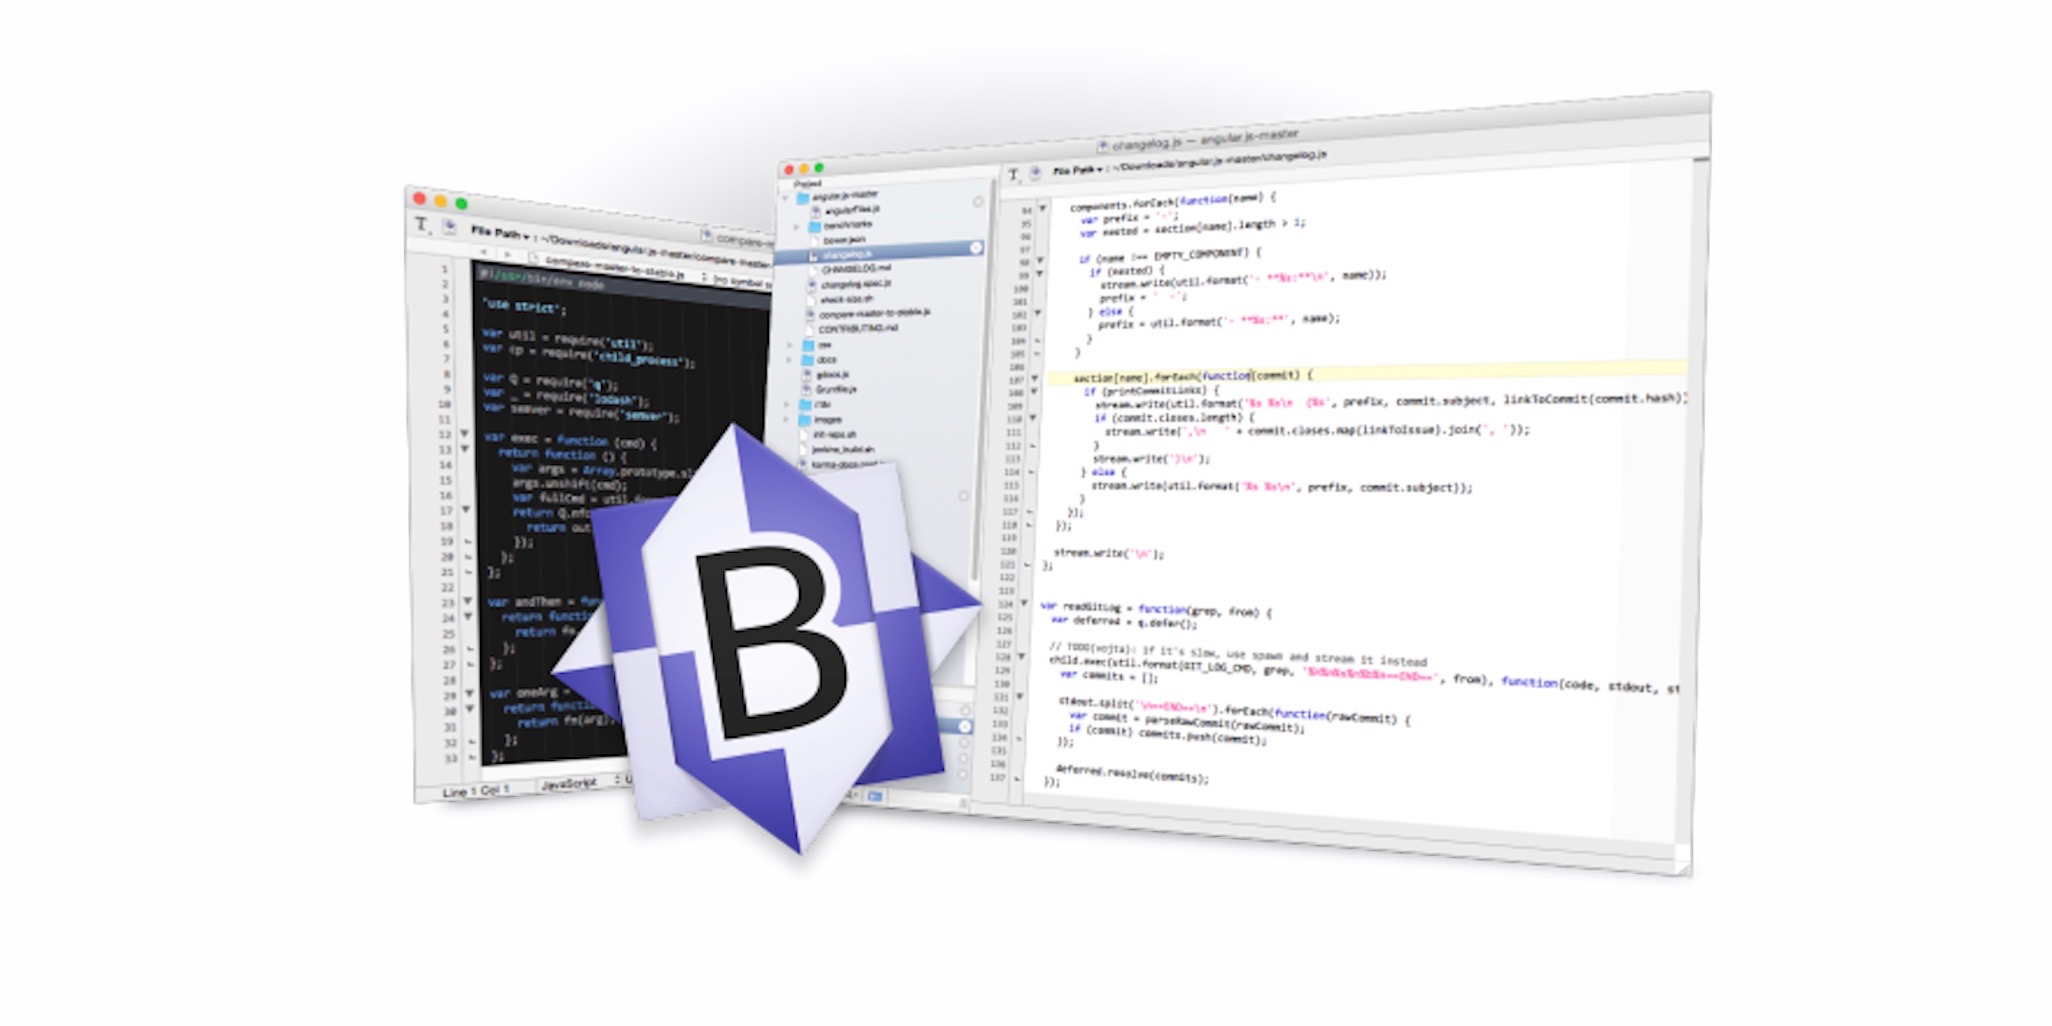 bbedit 12 review